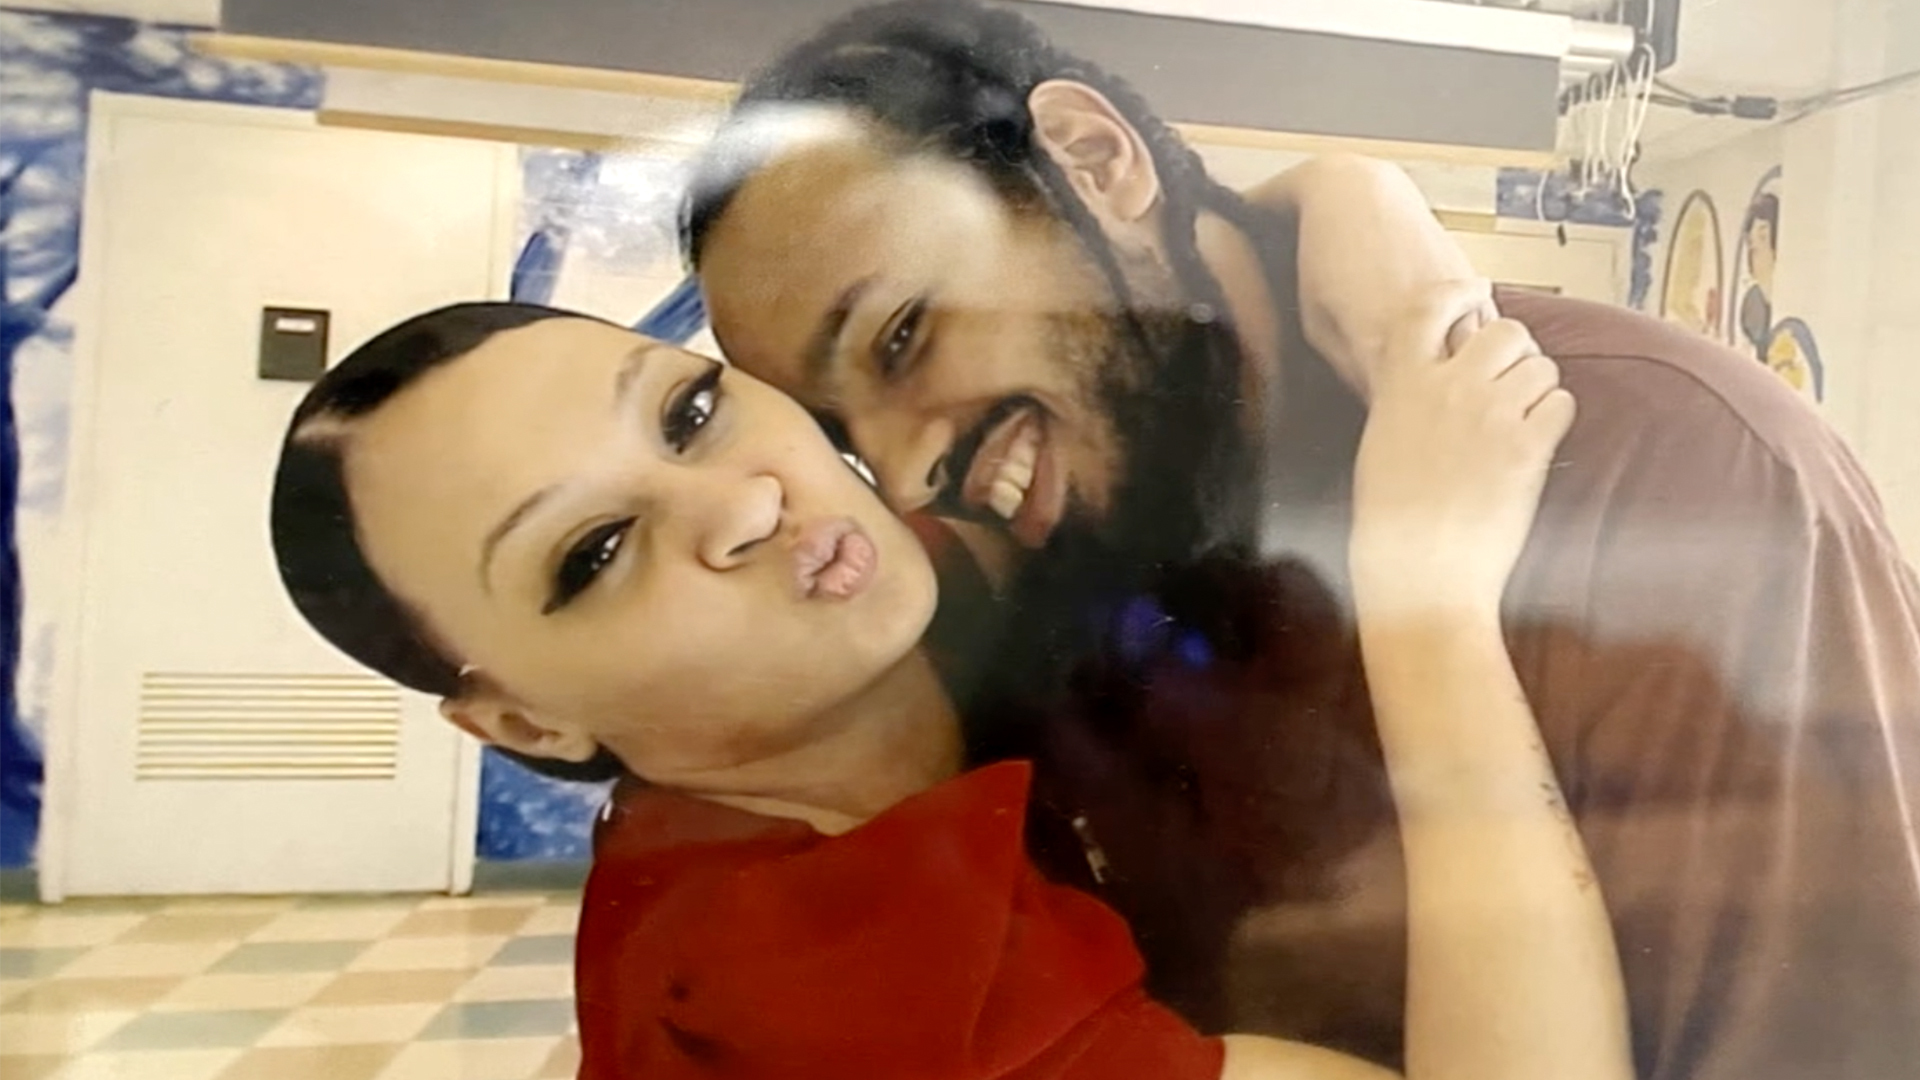 Watch Deleted Scene: Justine & Michael Get Freaky! | Love During Lockup Video Extras